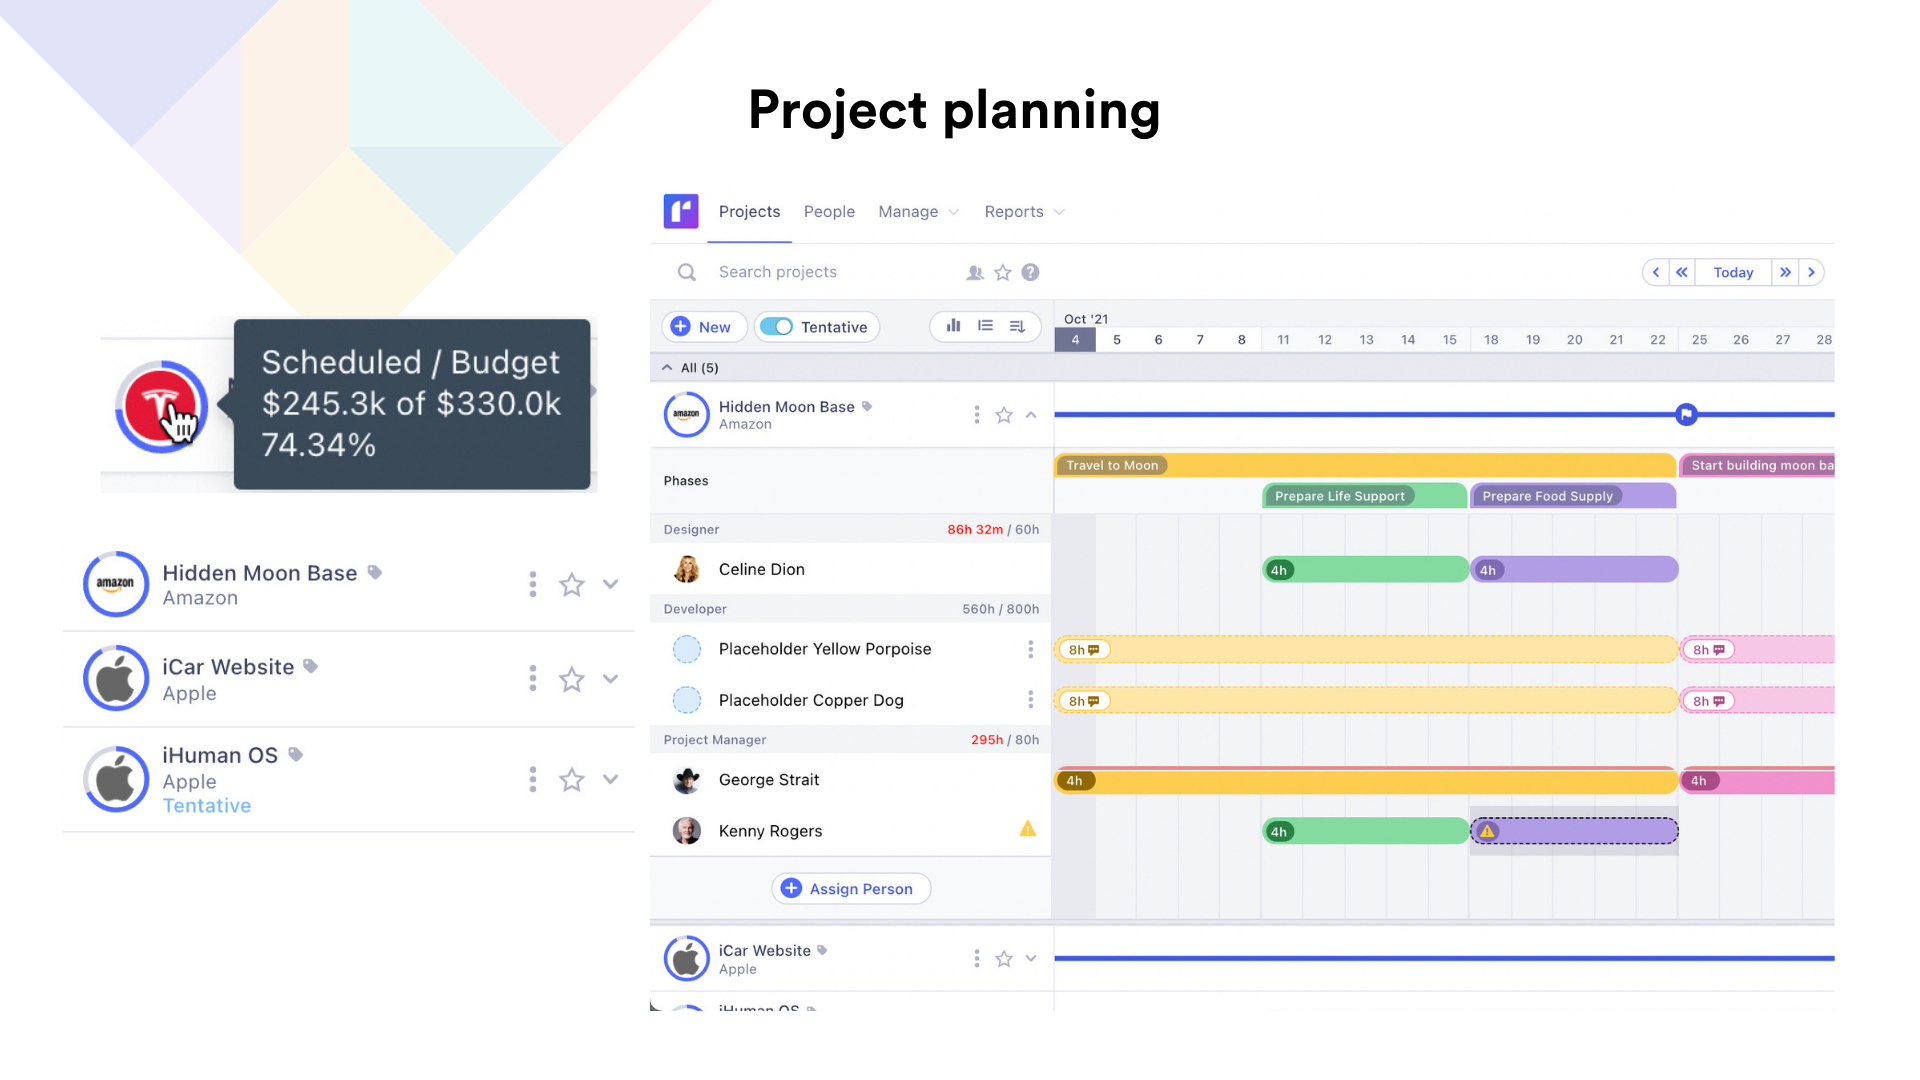 Stay on top of changing projects, plan projects with your budget in mind, and add tentative projects.